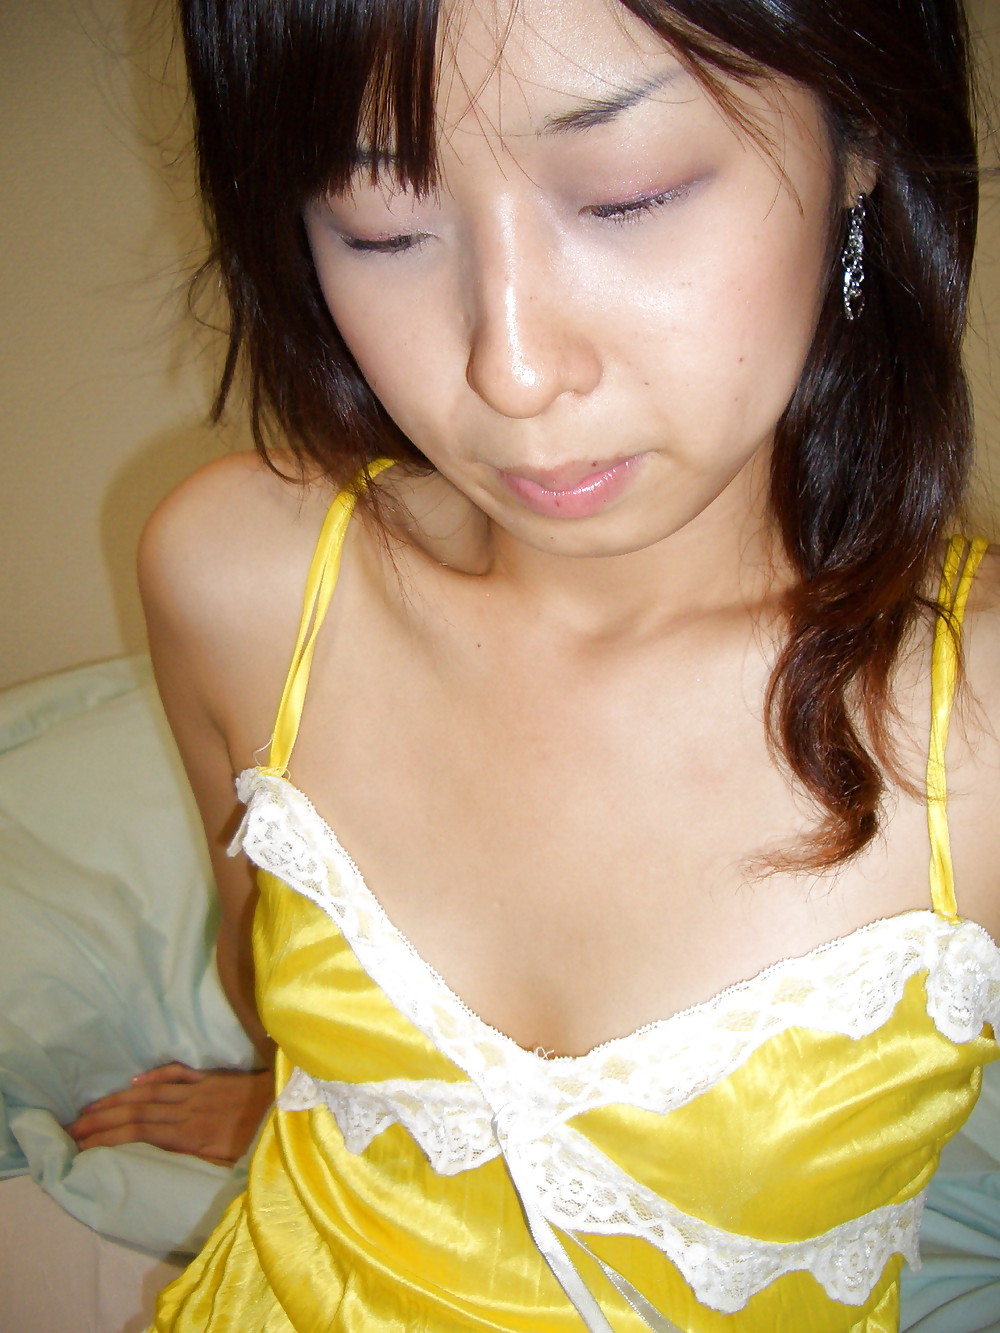 Japanese Teen spread and creampie (Part 1) #19312914